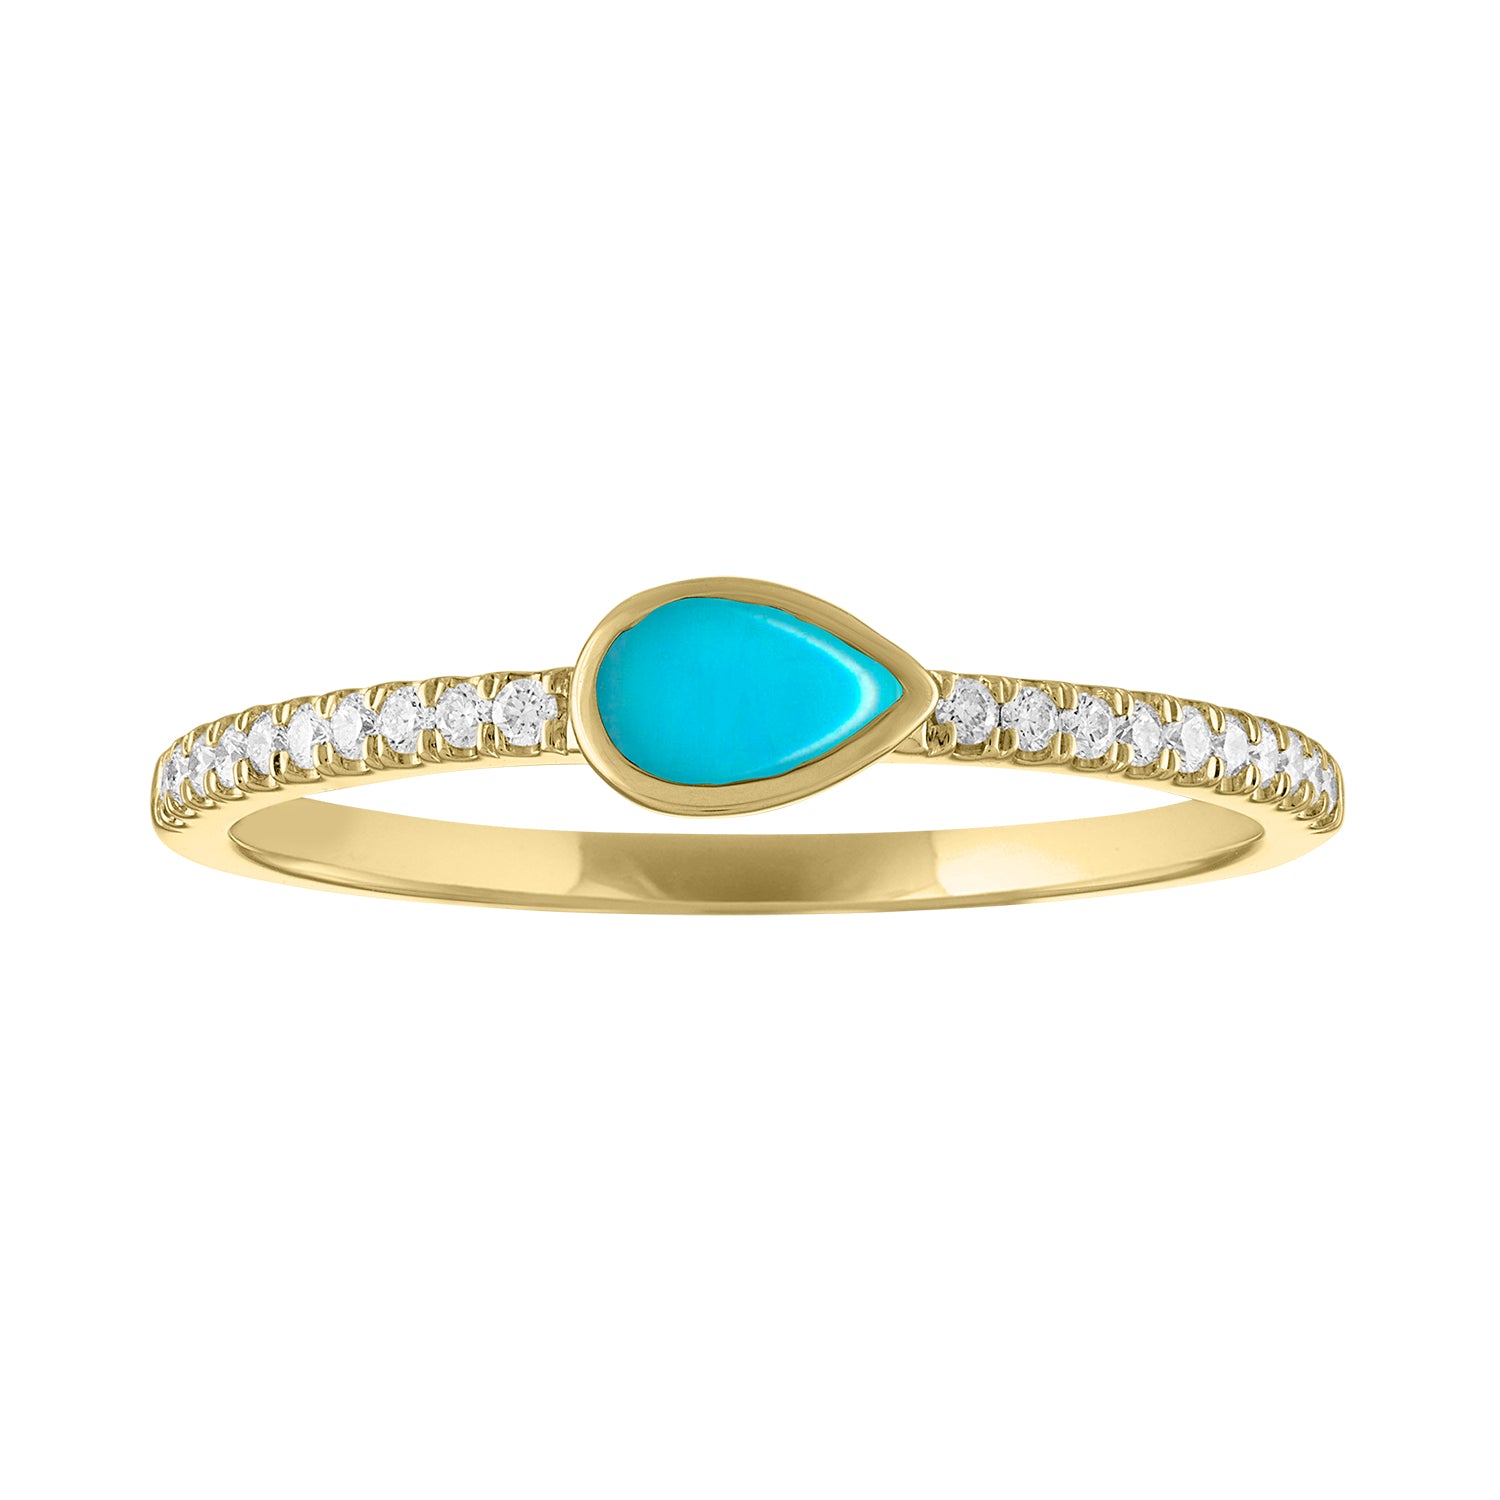 Yellow gold skinny band with a bezeled pear shape turquoise in the center and round diamonds on the shank. 